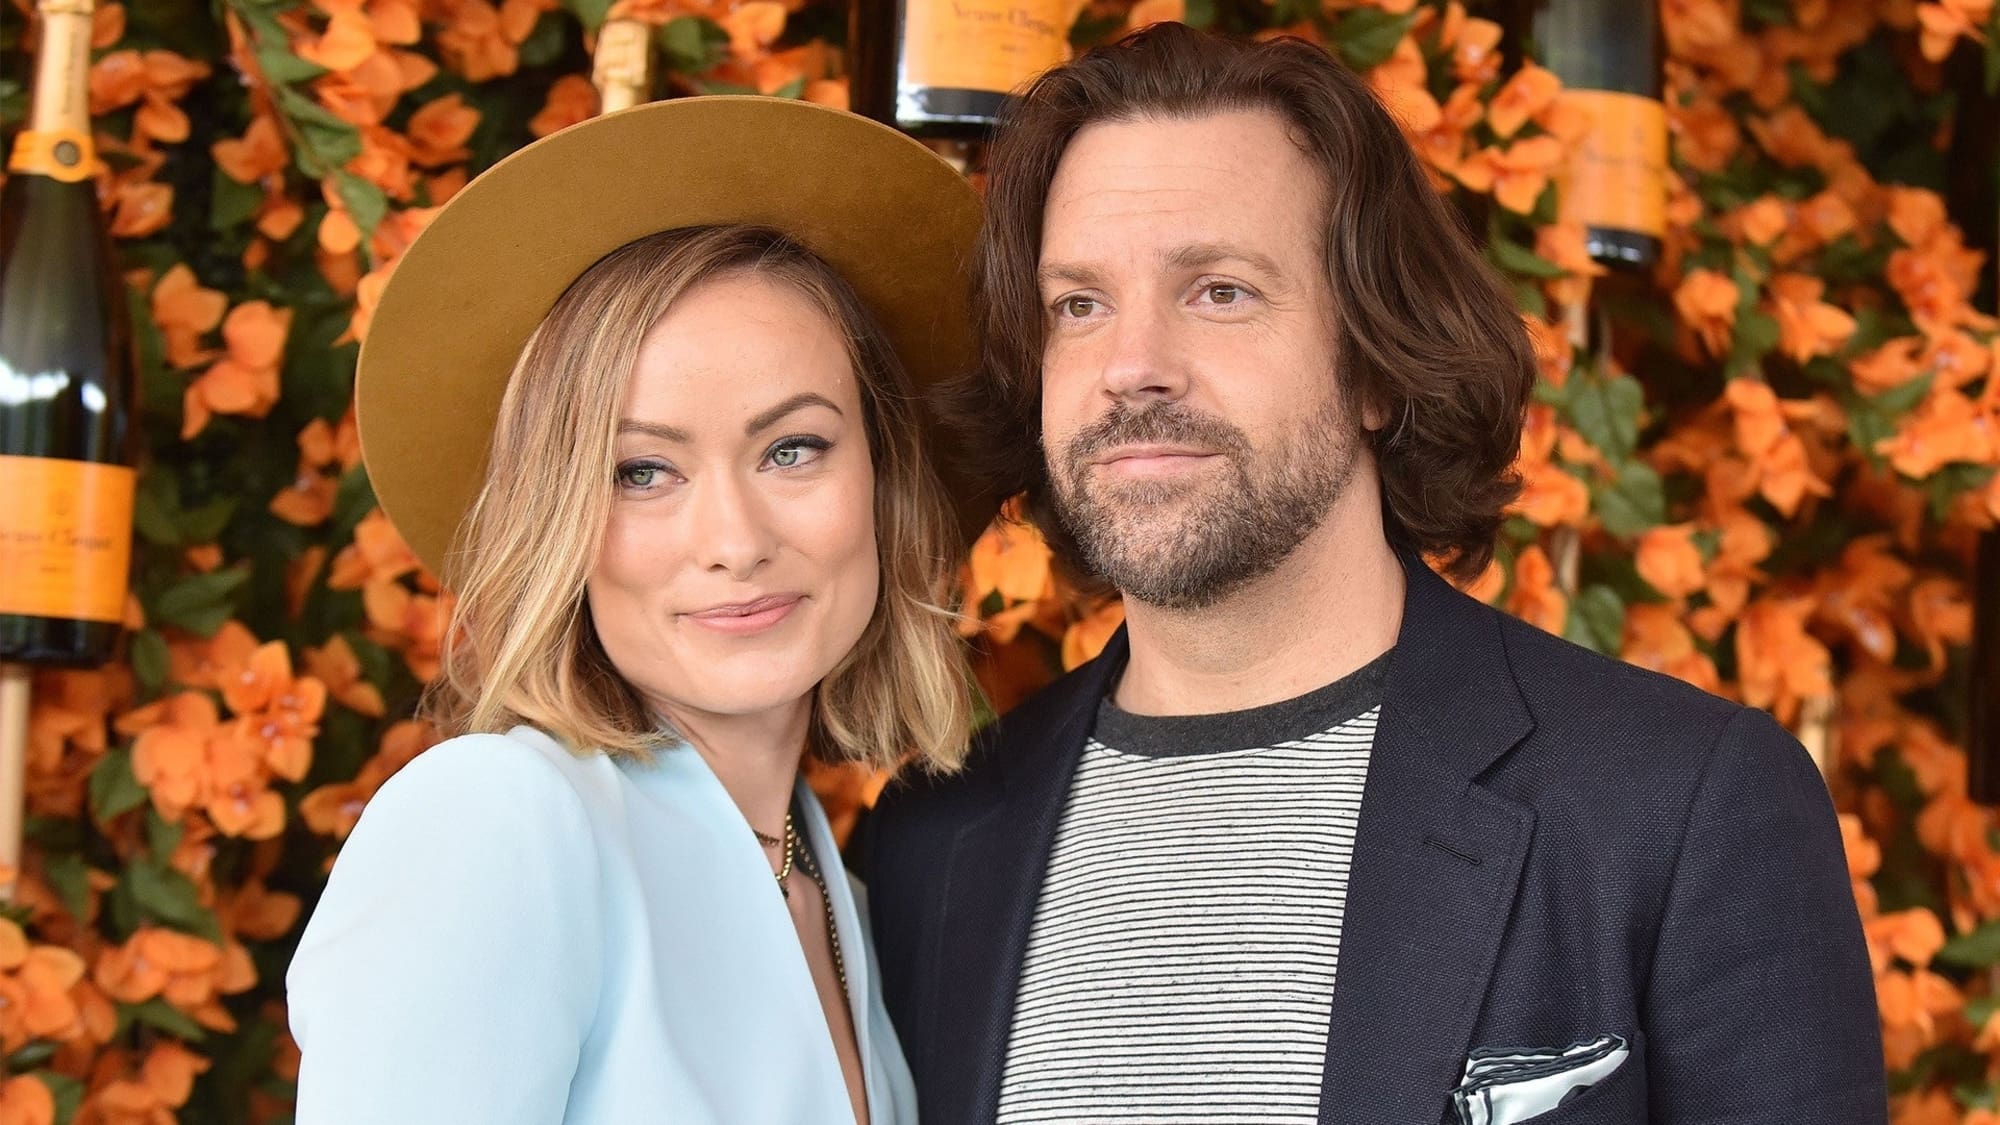 Many are not surprised Harry Styles is officially off the market, especially with wedding date, Olivia Wilde. What's Jason Sudeikis's reaction?